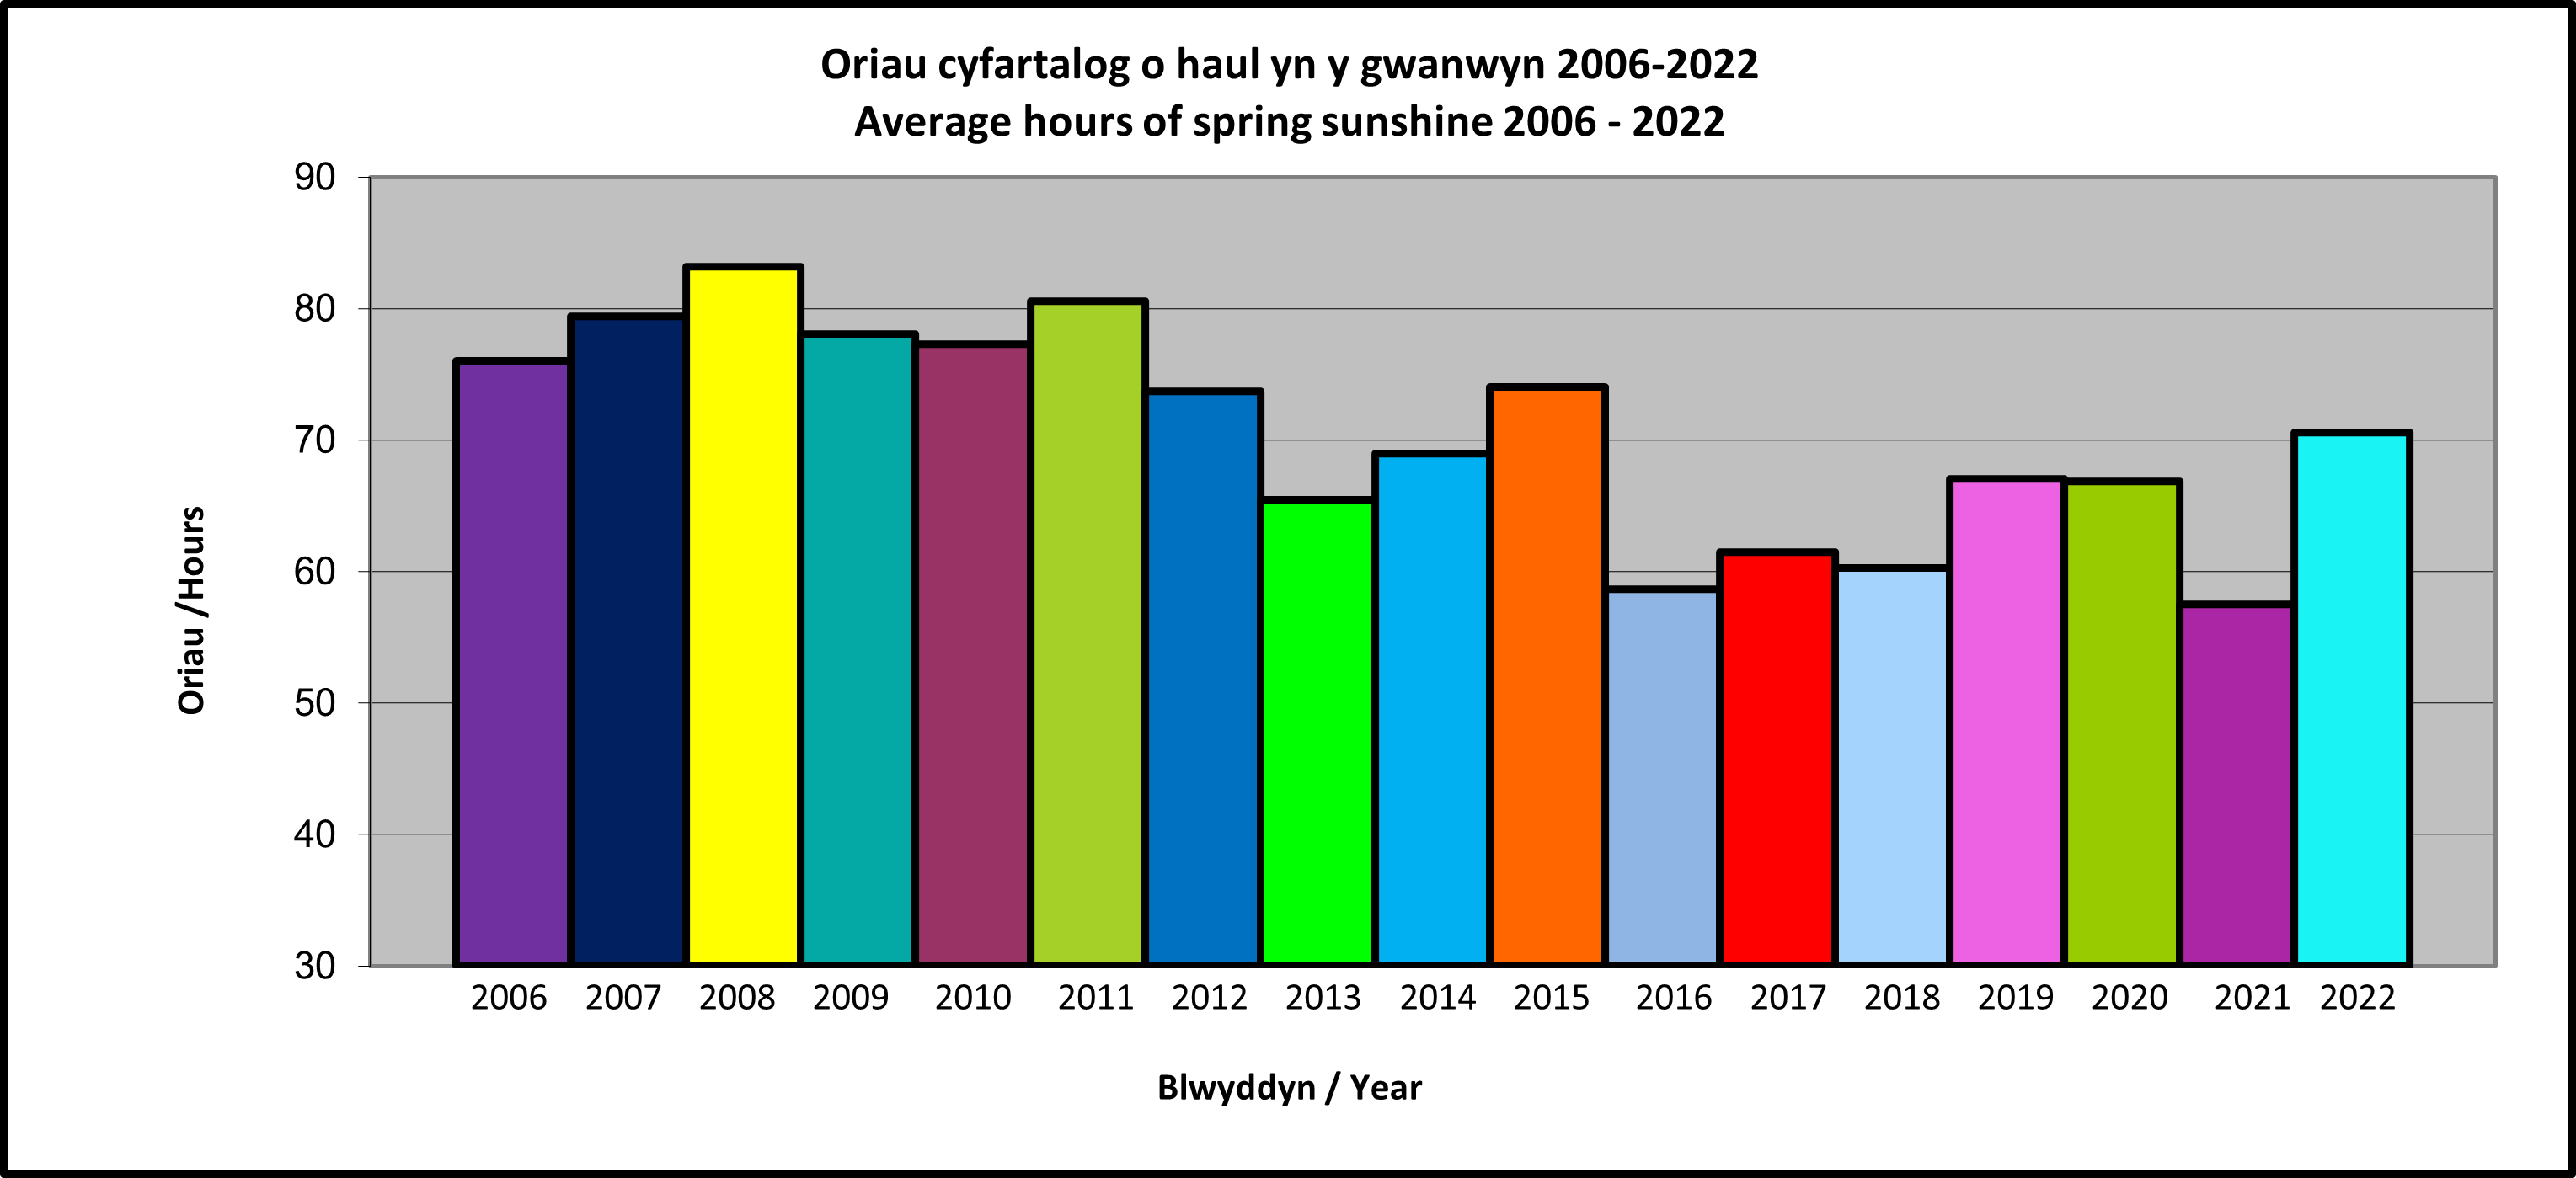 Colourful graph showing the average hours of spring sunshine between 2006 and 2022, the average drops slightly after 2015with 2022 the highest amount since then